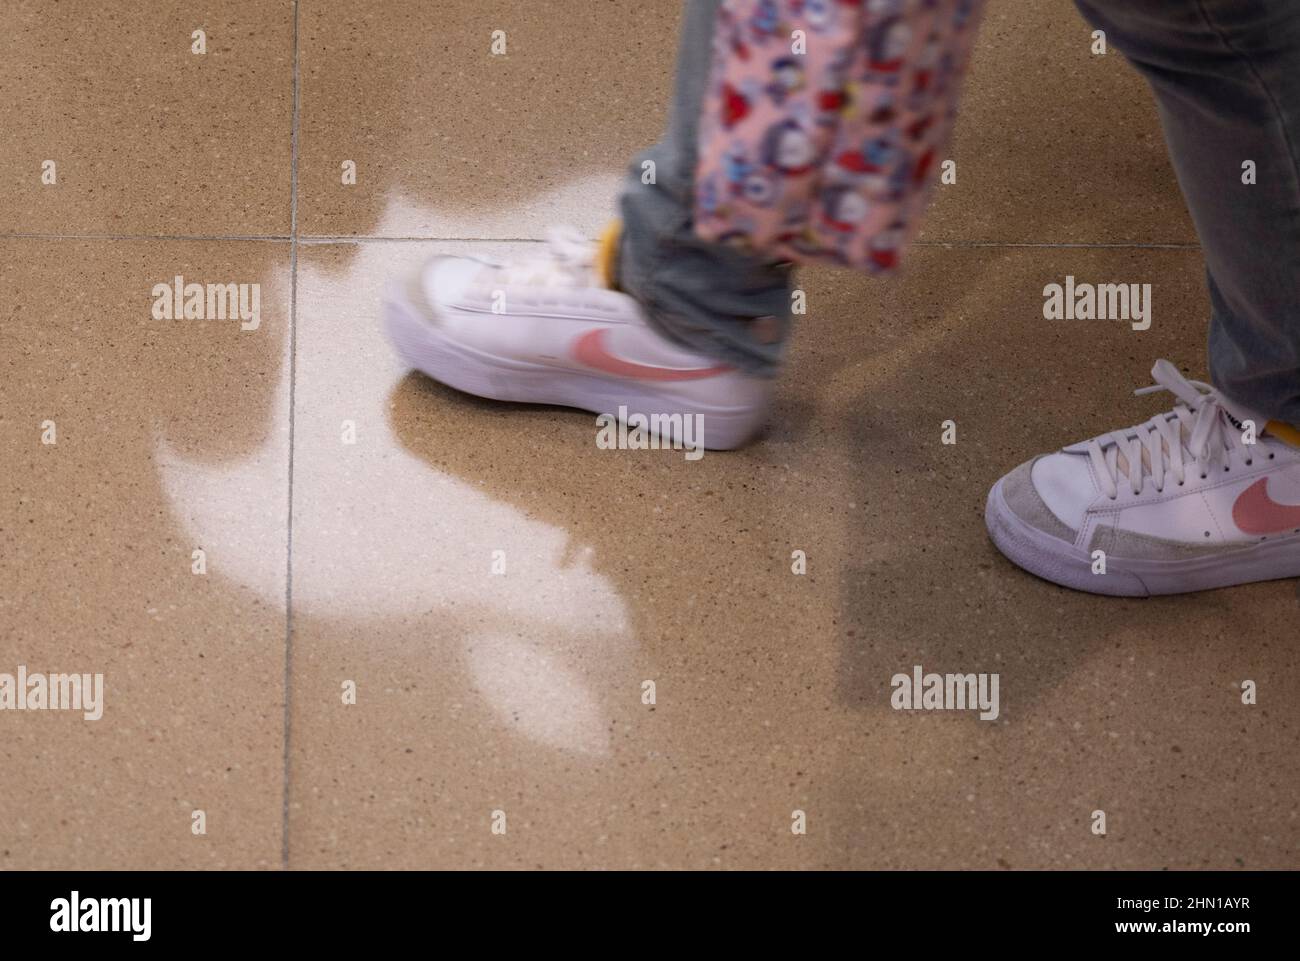 Wearing Nike Shoes High Resolution Stock Photography and Images - Alamy